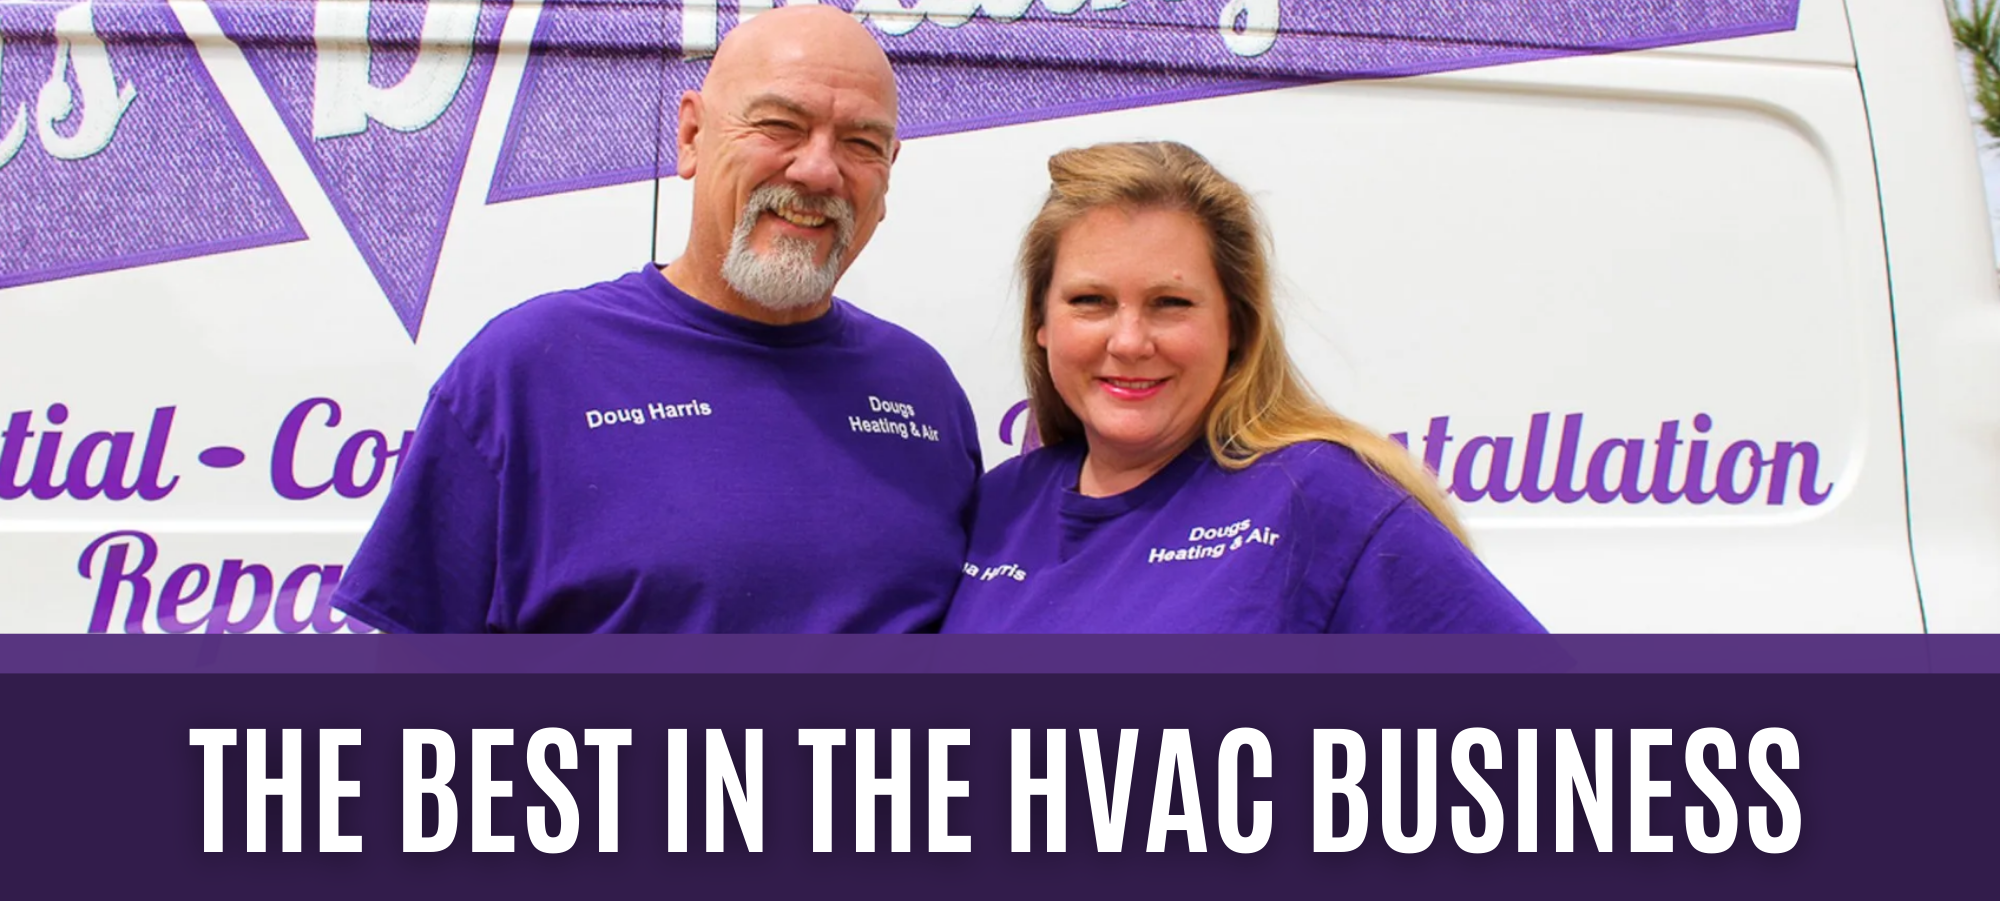 The Best in the HVAC Business - Doug's Heating and Air husband and wife team!